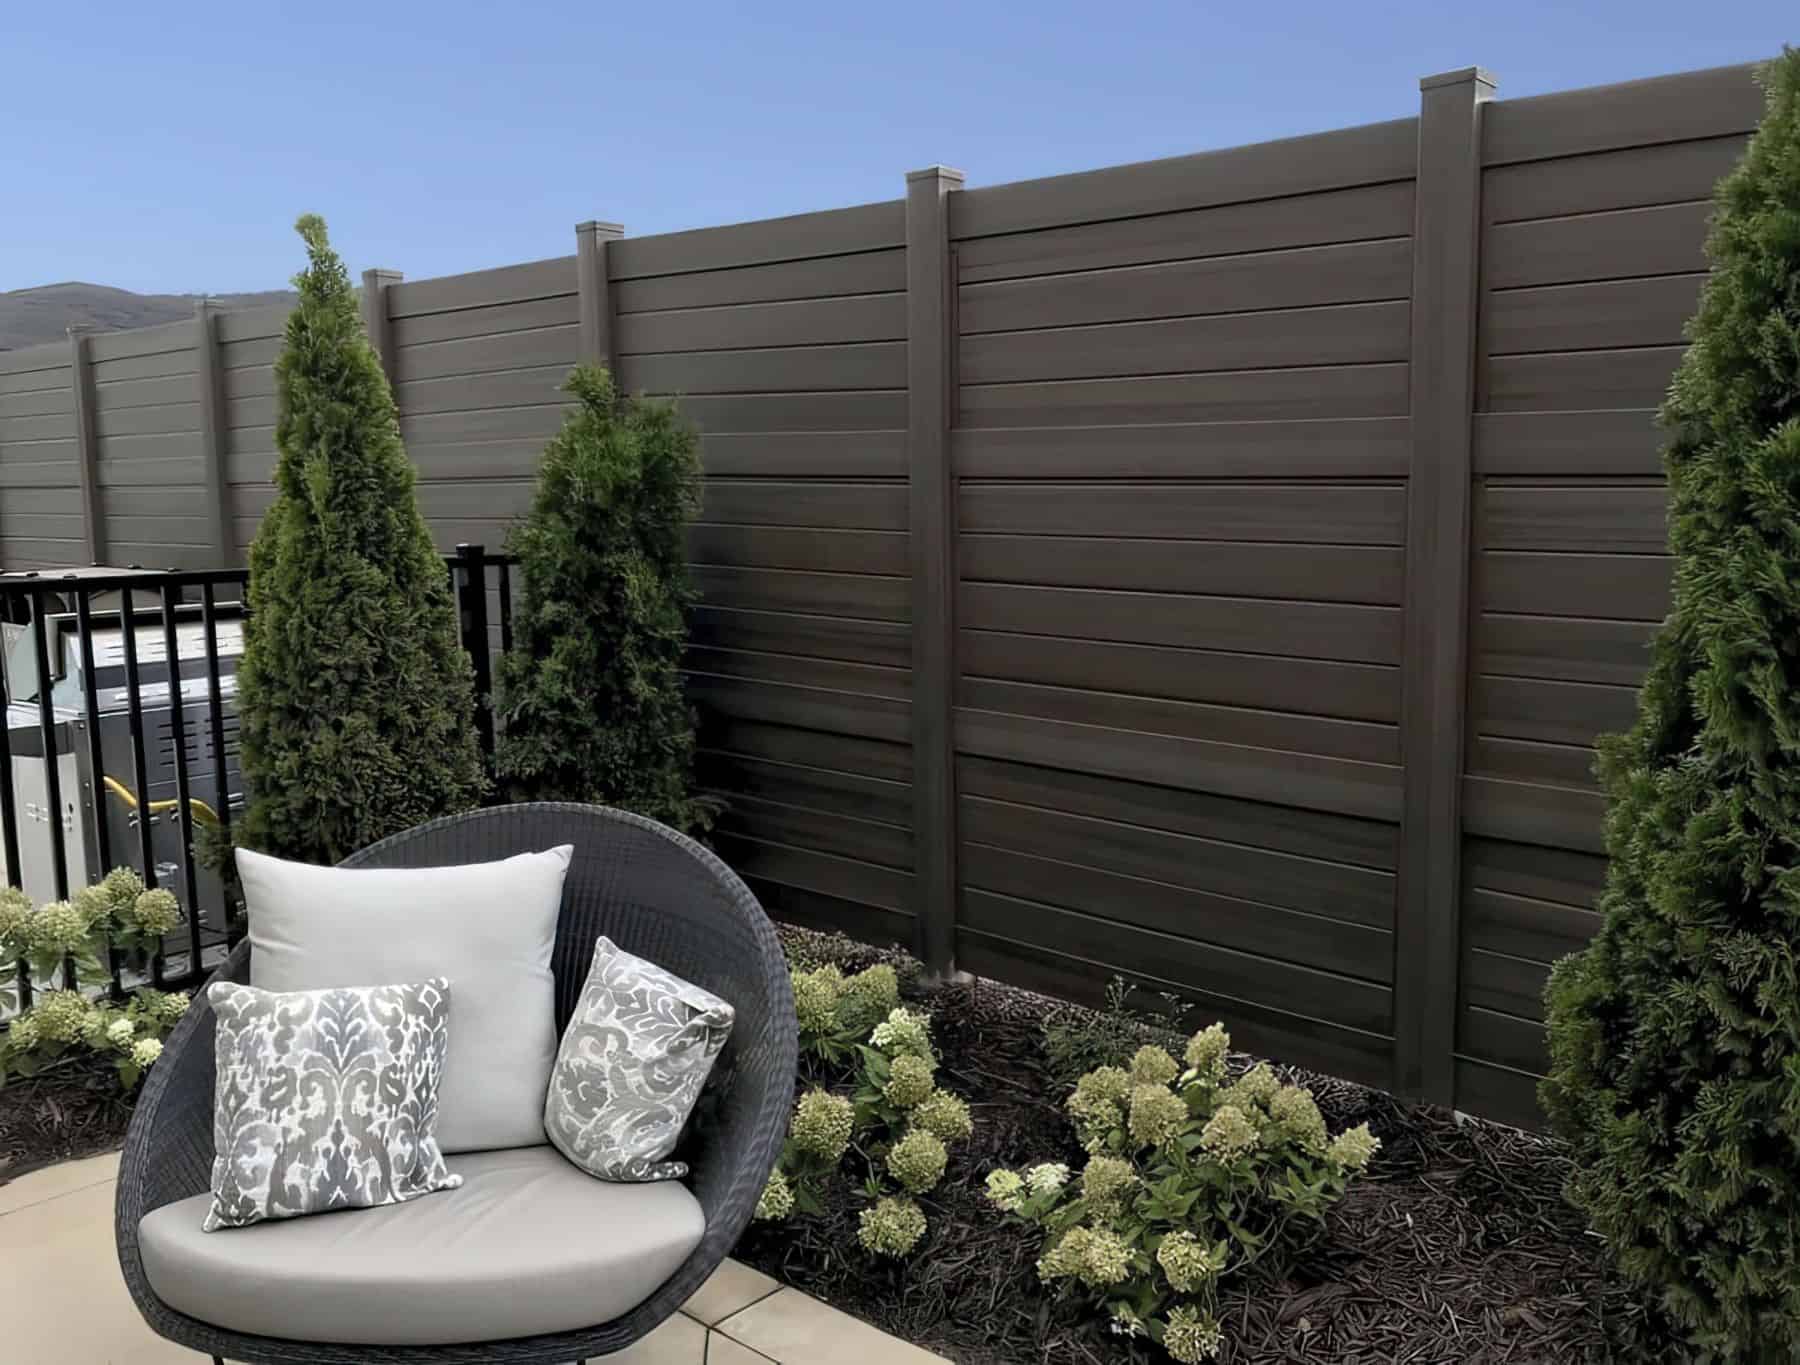 A vinyl privacy horizontal fence behind a small garden with small shrubs and trees in the backyard retreat